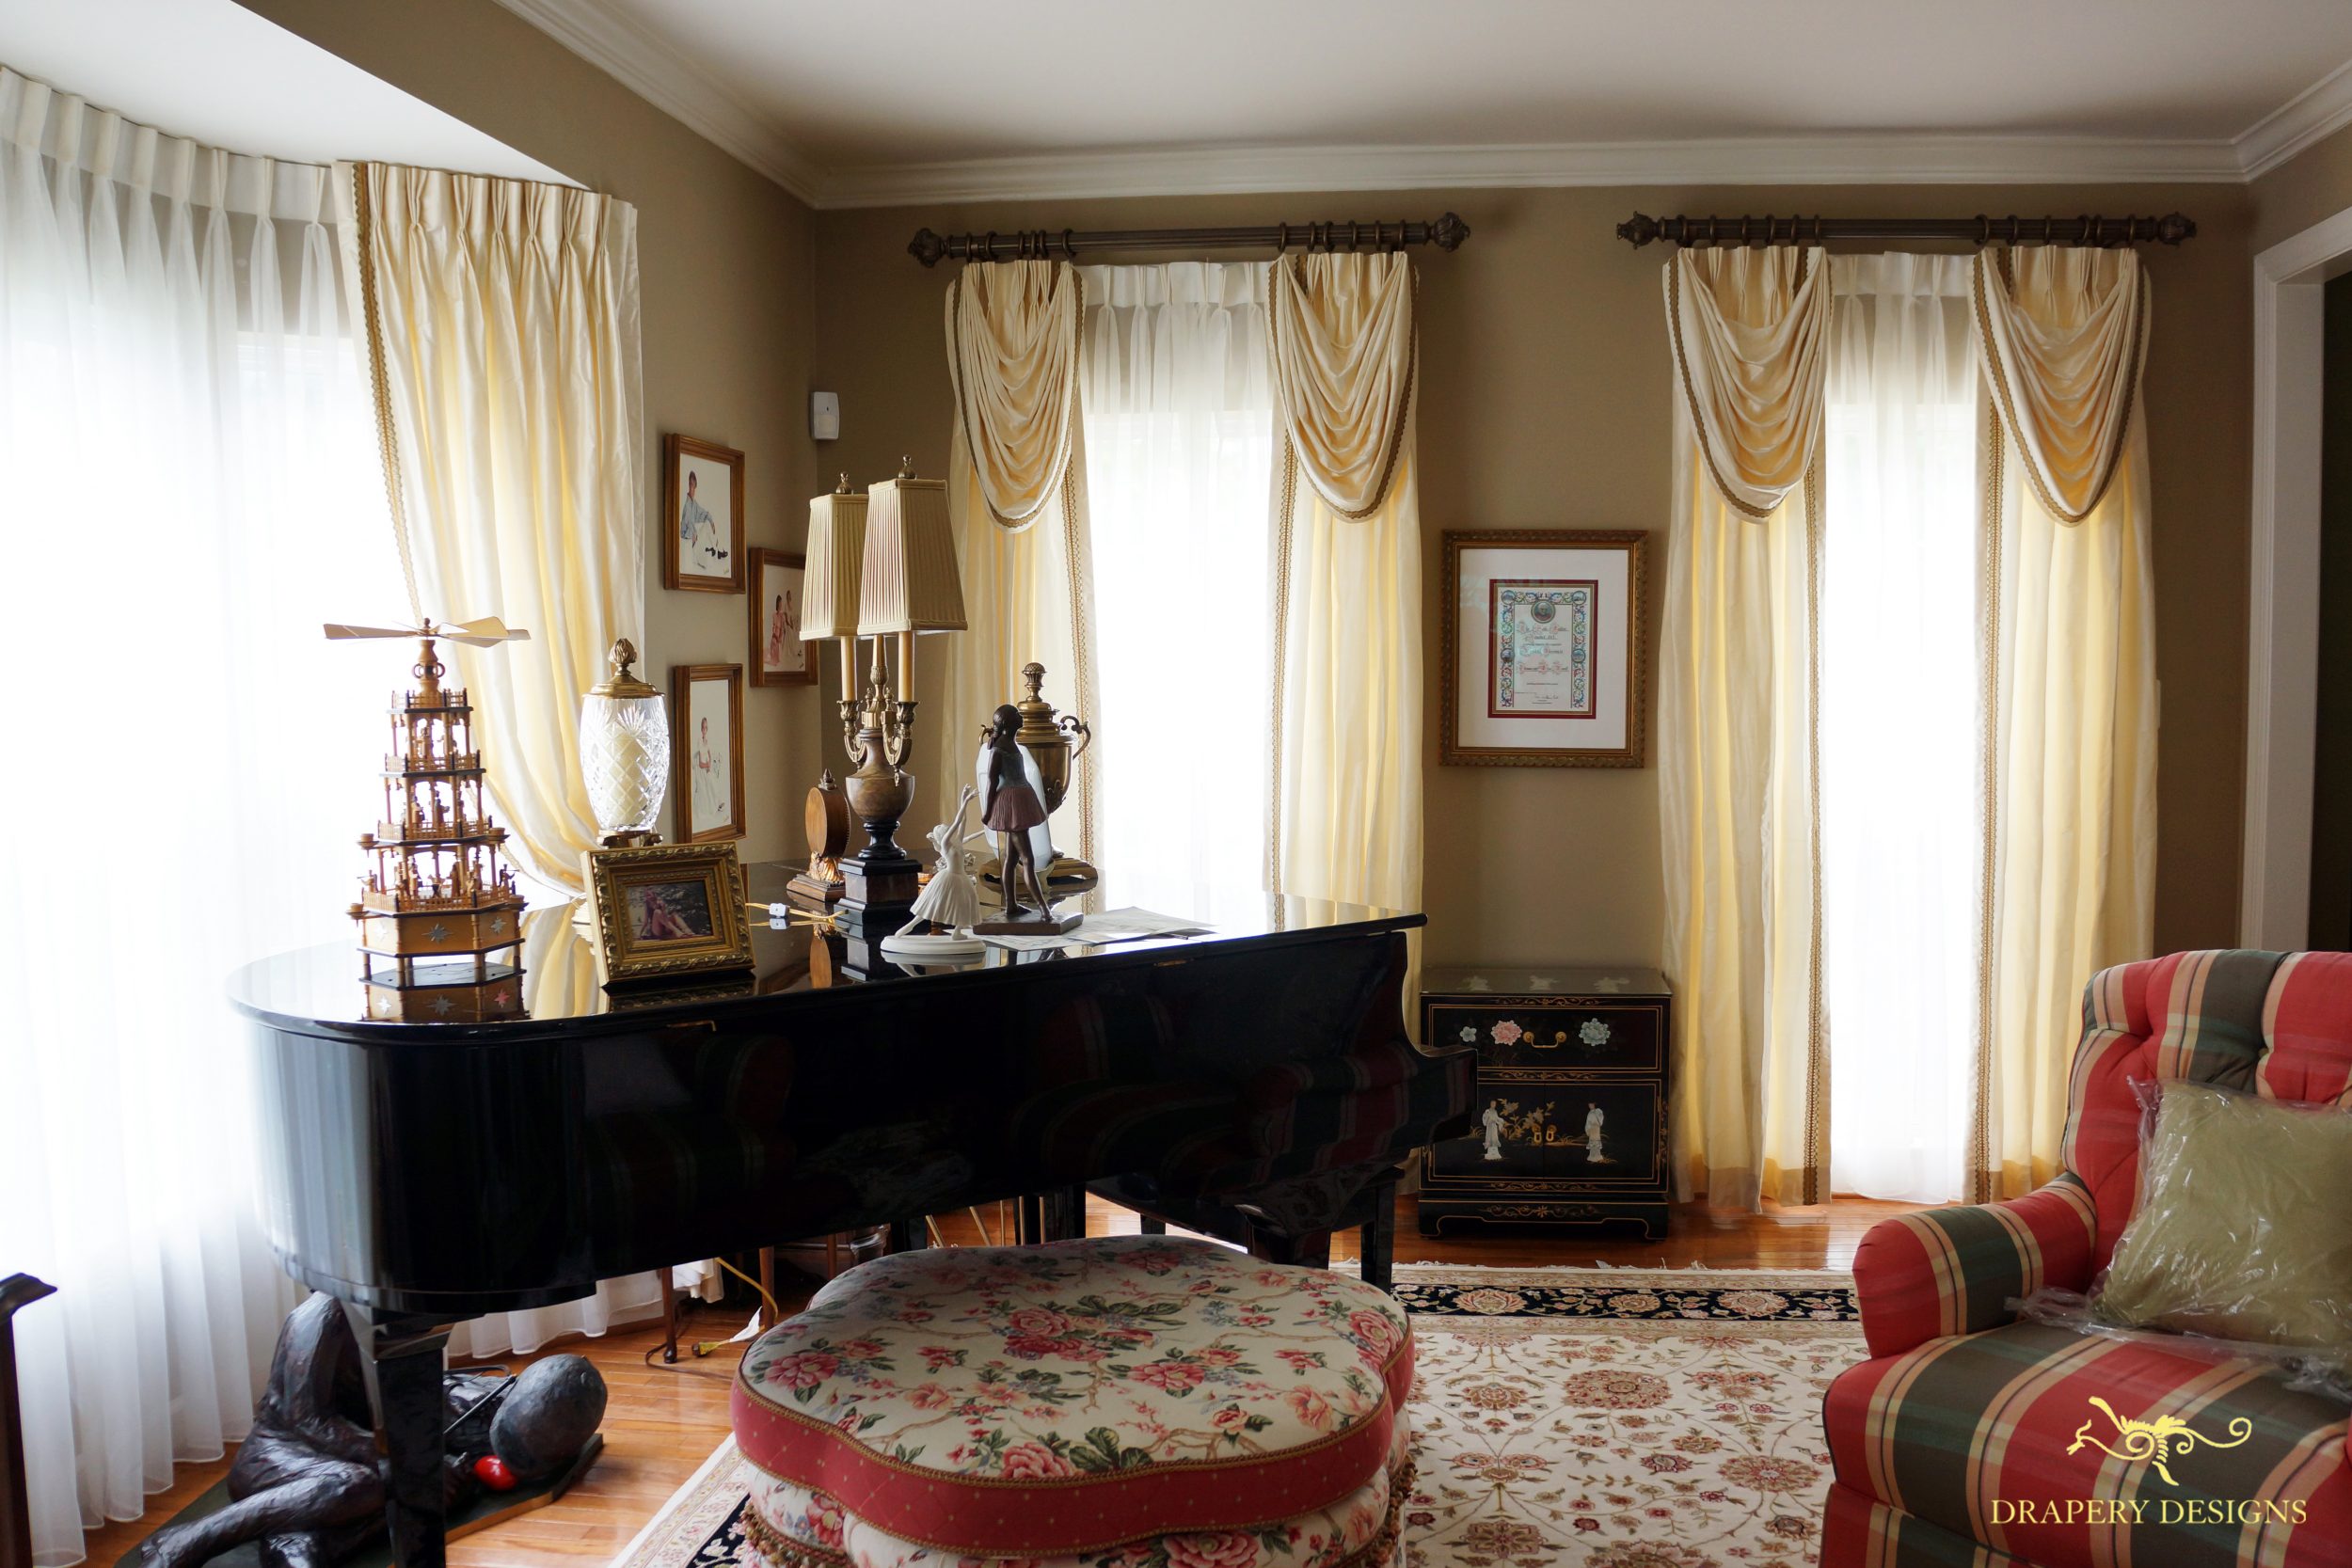 Interlined silk panels with classic swags and trim accent for formal room.